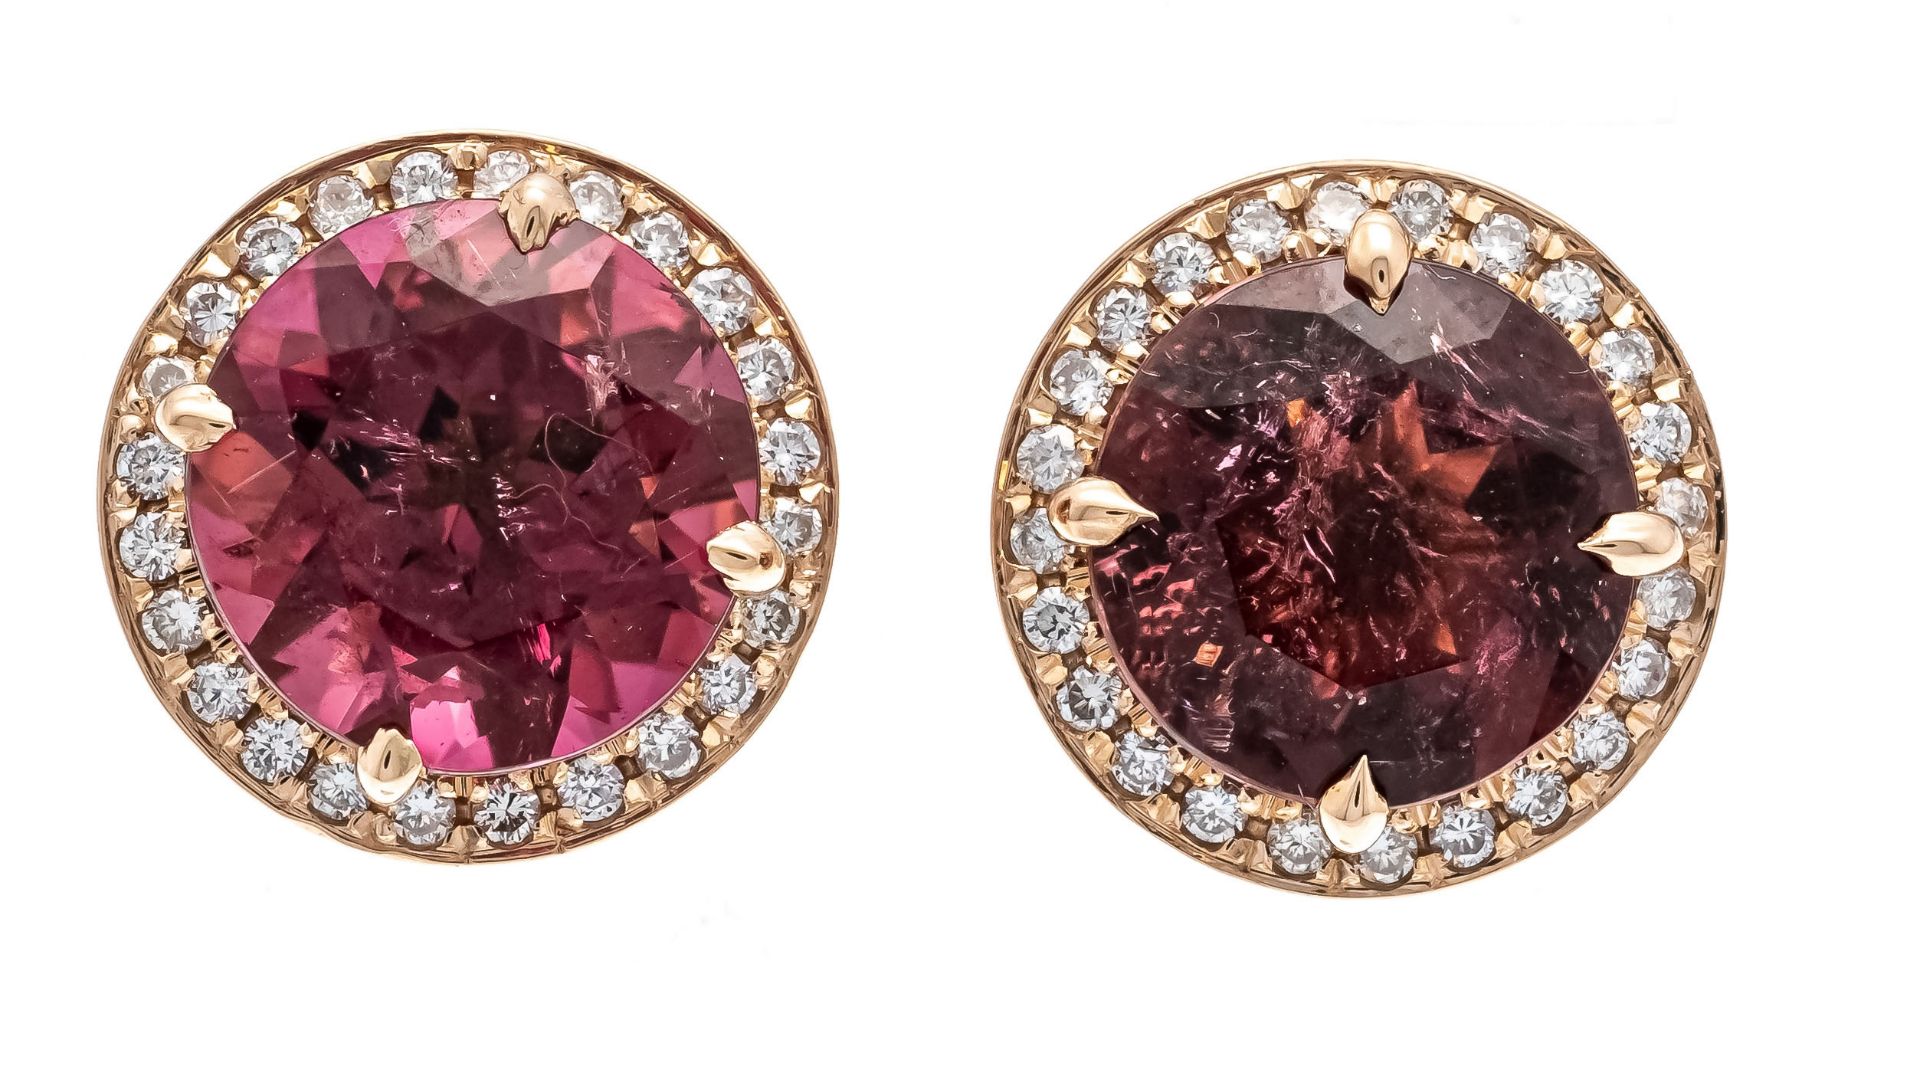 Rubellite diamond earrings RG 750/000 with 2 round faceted rubellites, total 8.40 ct slightly